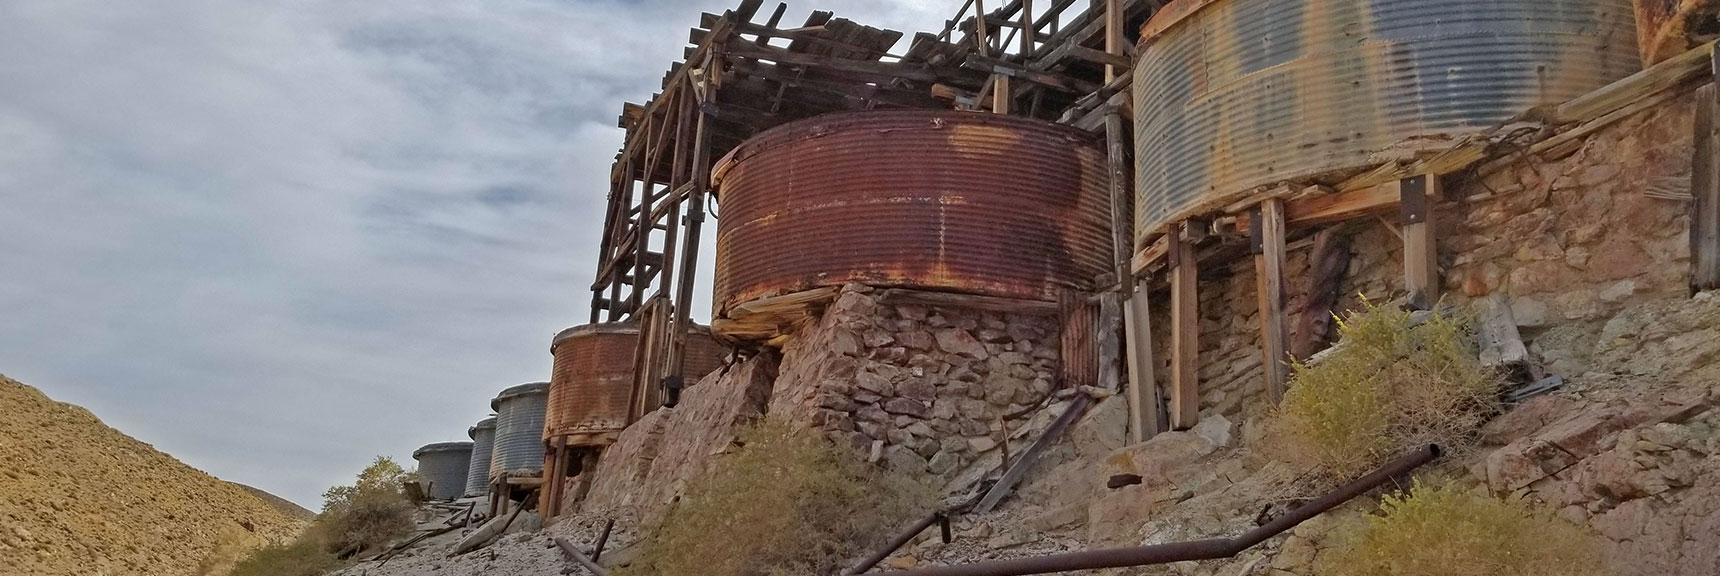 Nine Large Cyanide Tanks, Final Process to Dissolve Crushed Ore to Extract Gold | Skidoo Stamp Mill, Panamint Mountains, Death Valley National Park, CA